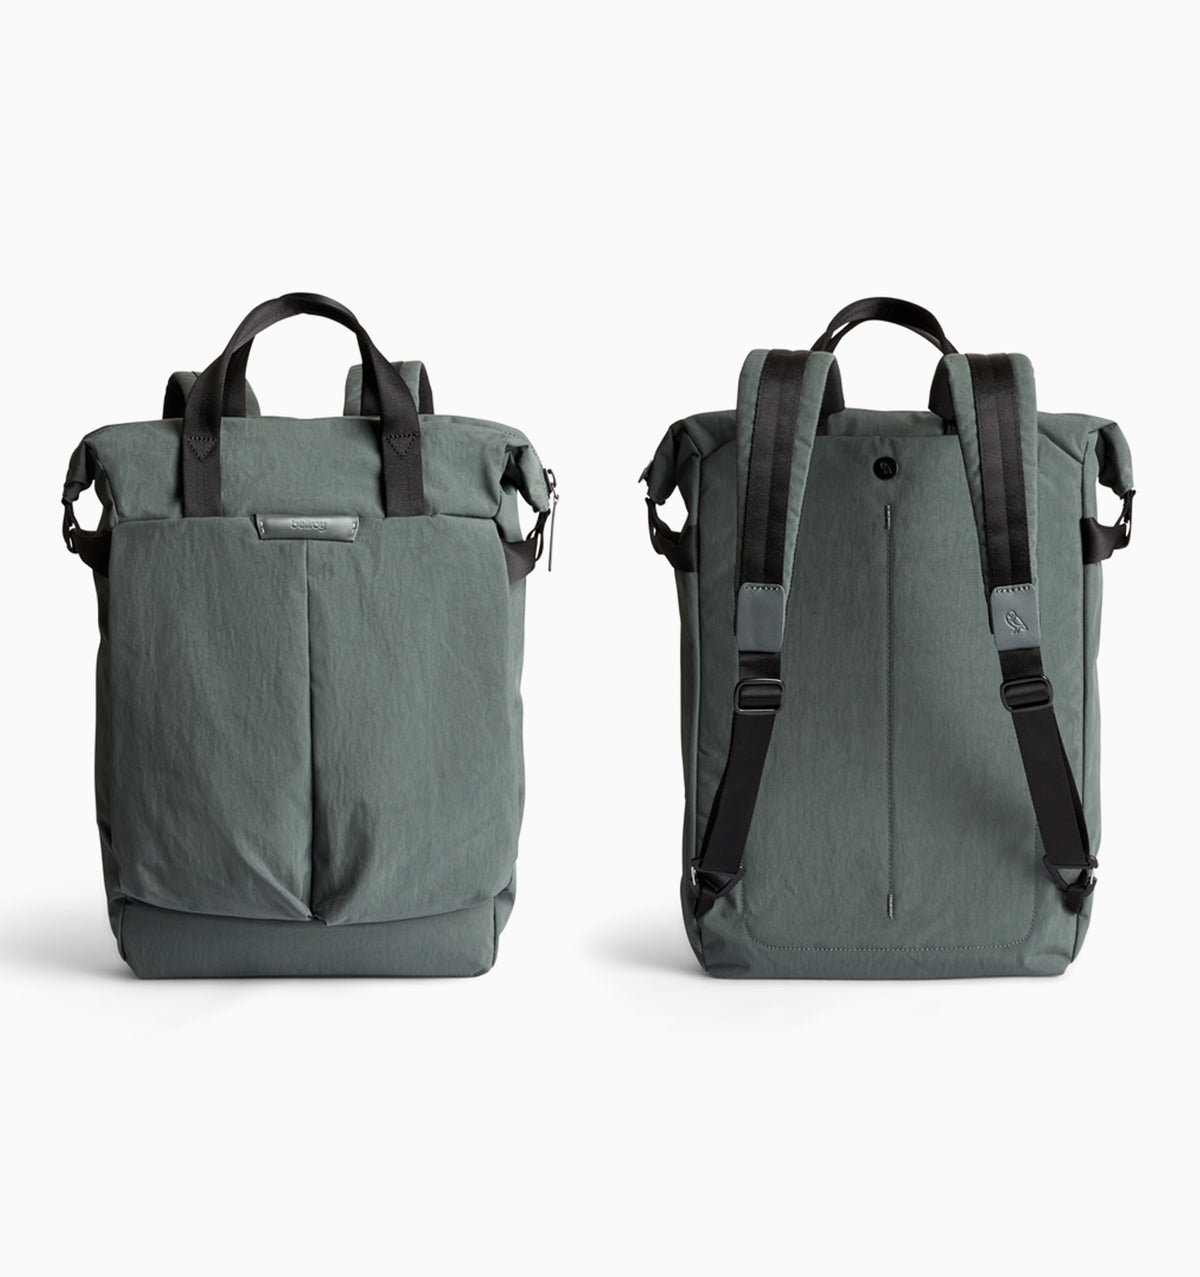 Bellroy 13" Tokyo Totepack Compact Laptop Backpack 14L - Everglade